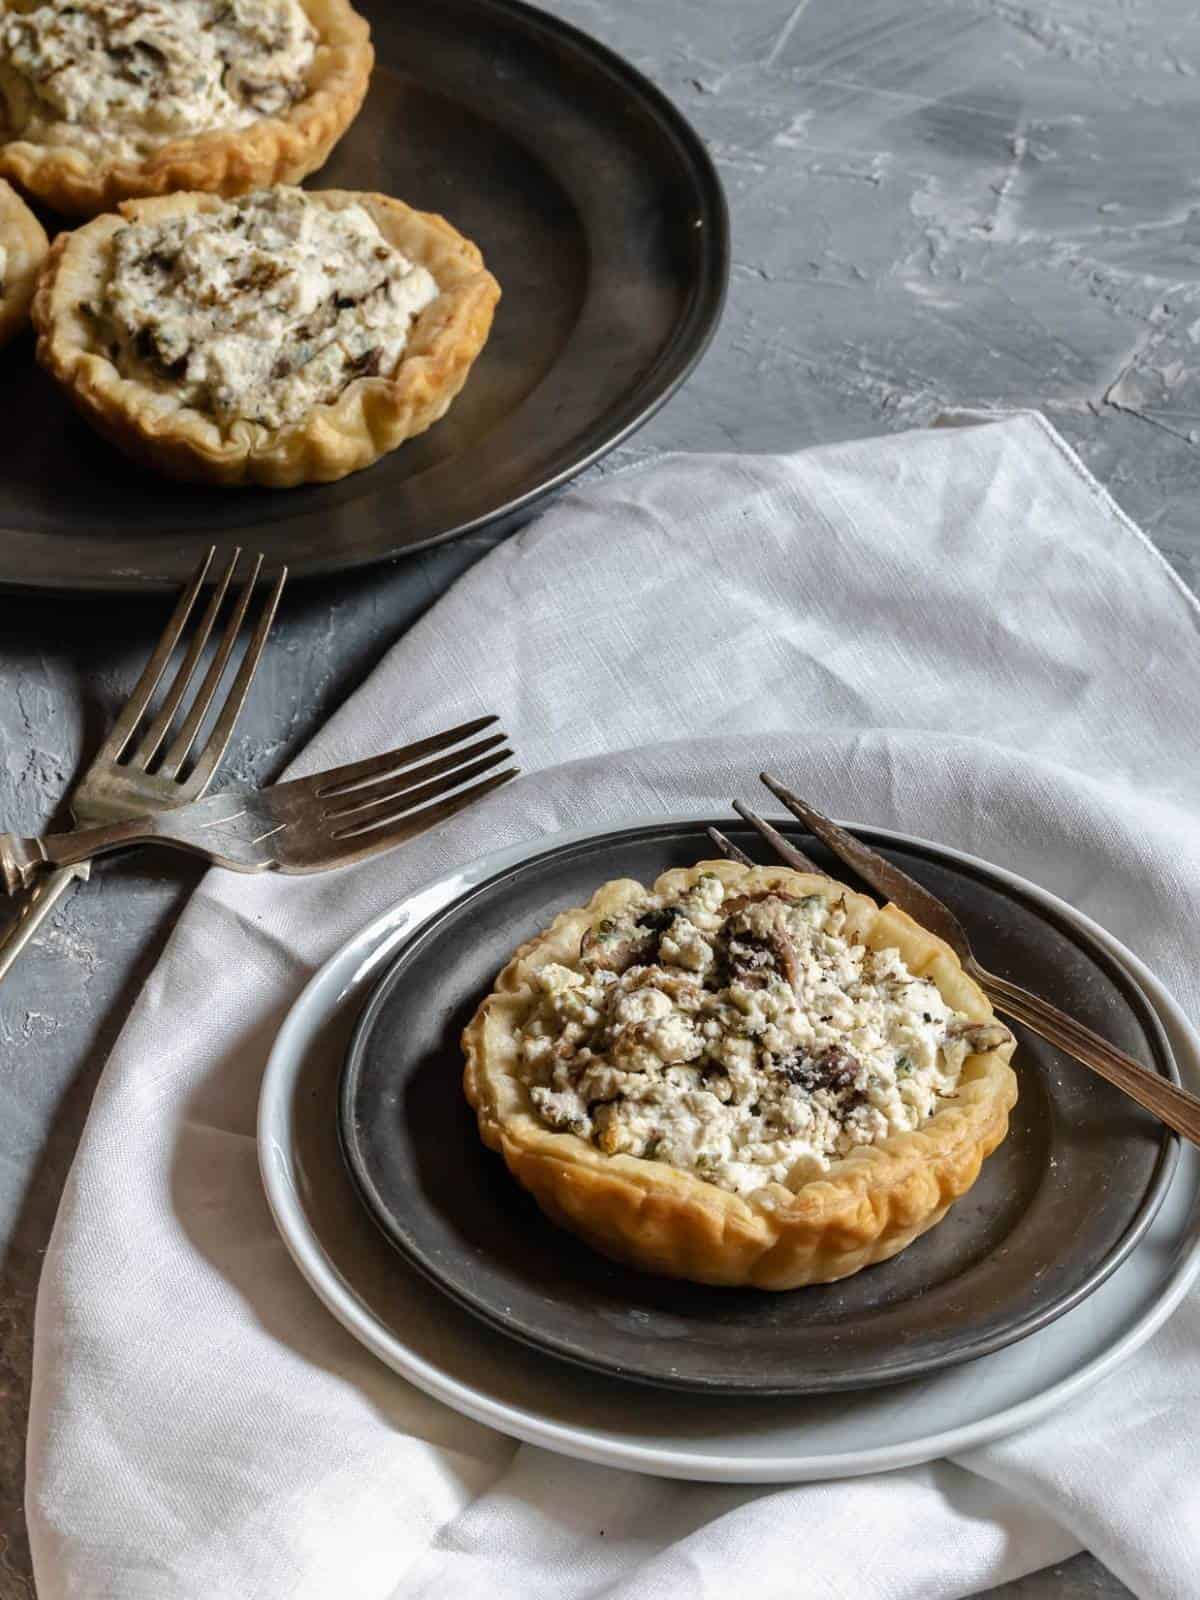 puff-pastry-tart-ricotta-and-mushrooms-truffle-on-plate-over-a-linen-with-fork-plate-with-three-other-tartlets-on the bottom-and-2-forks